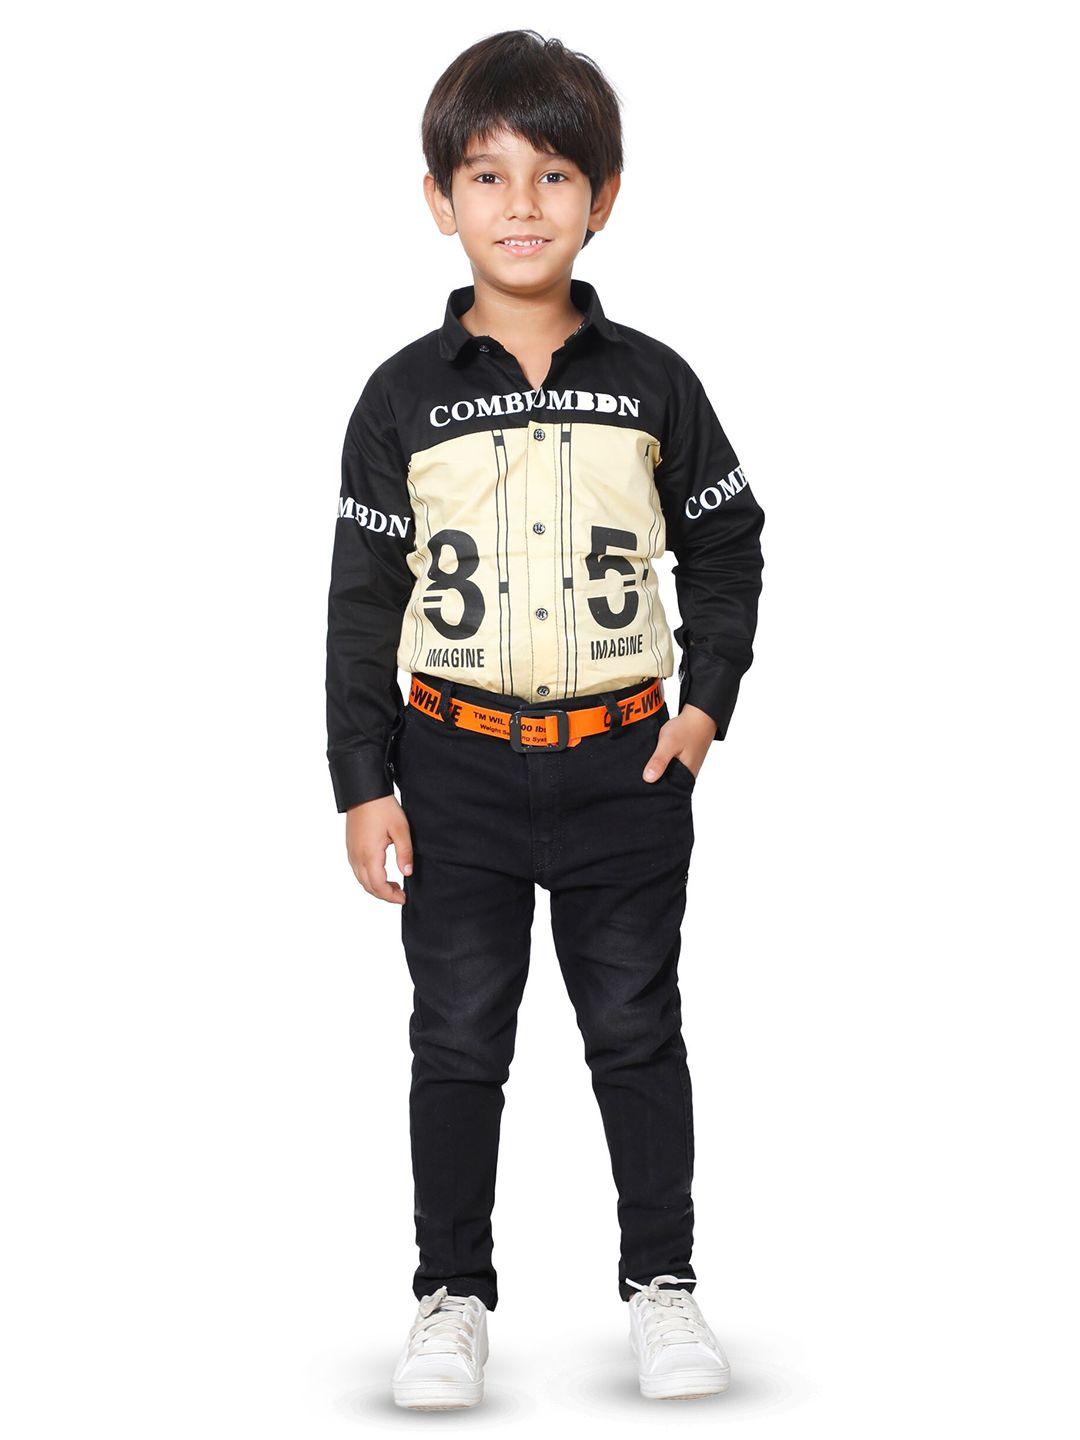 dkgf fashion boys yellow & black printed t-shirt with trousers